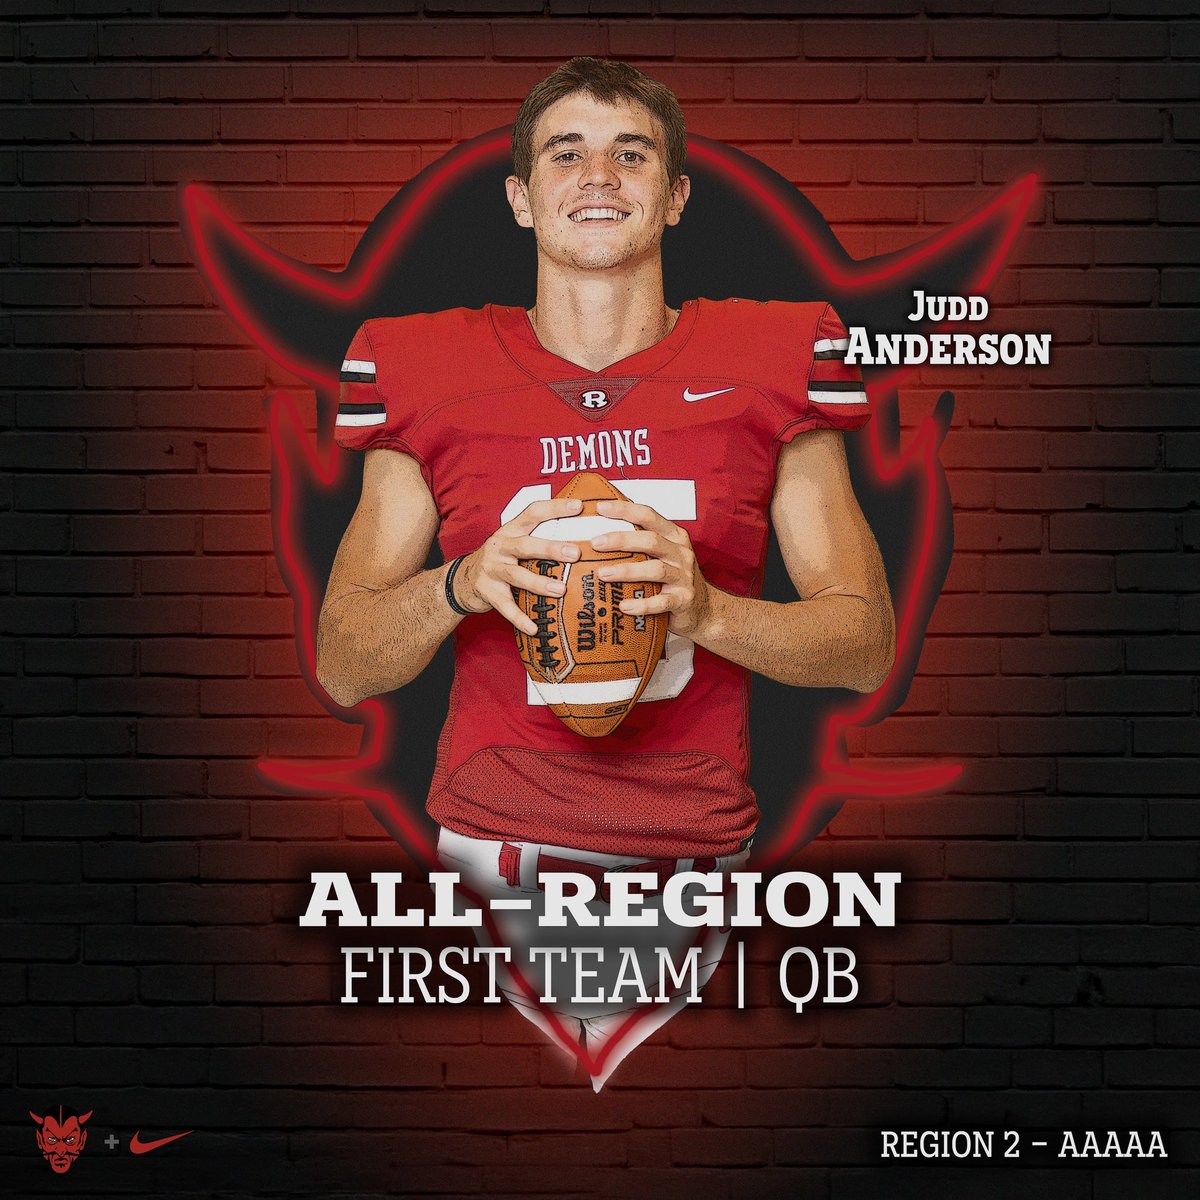 BIG congratulations to Judd Anderson with 2,917 passing yards for being named THE All-Region First Team QB‼️